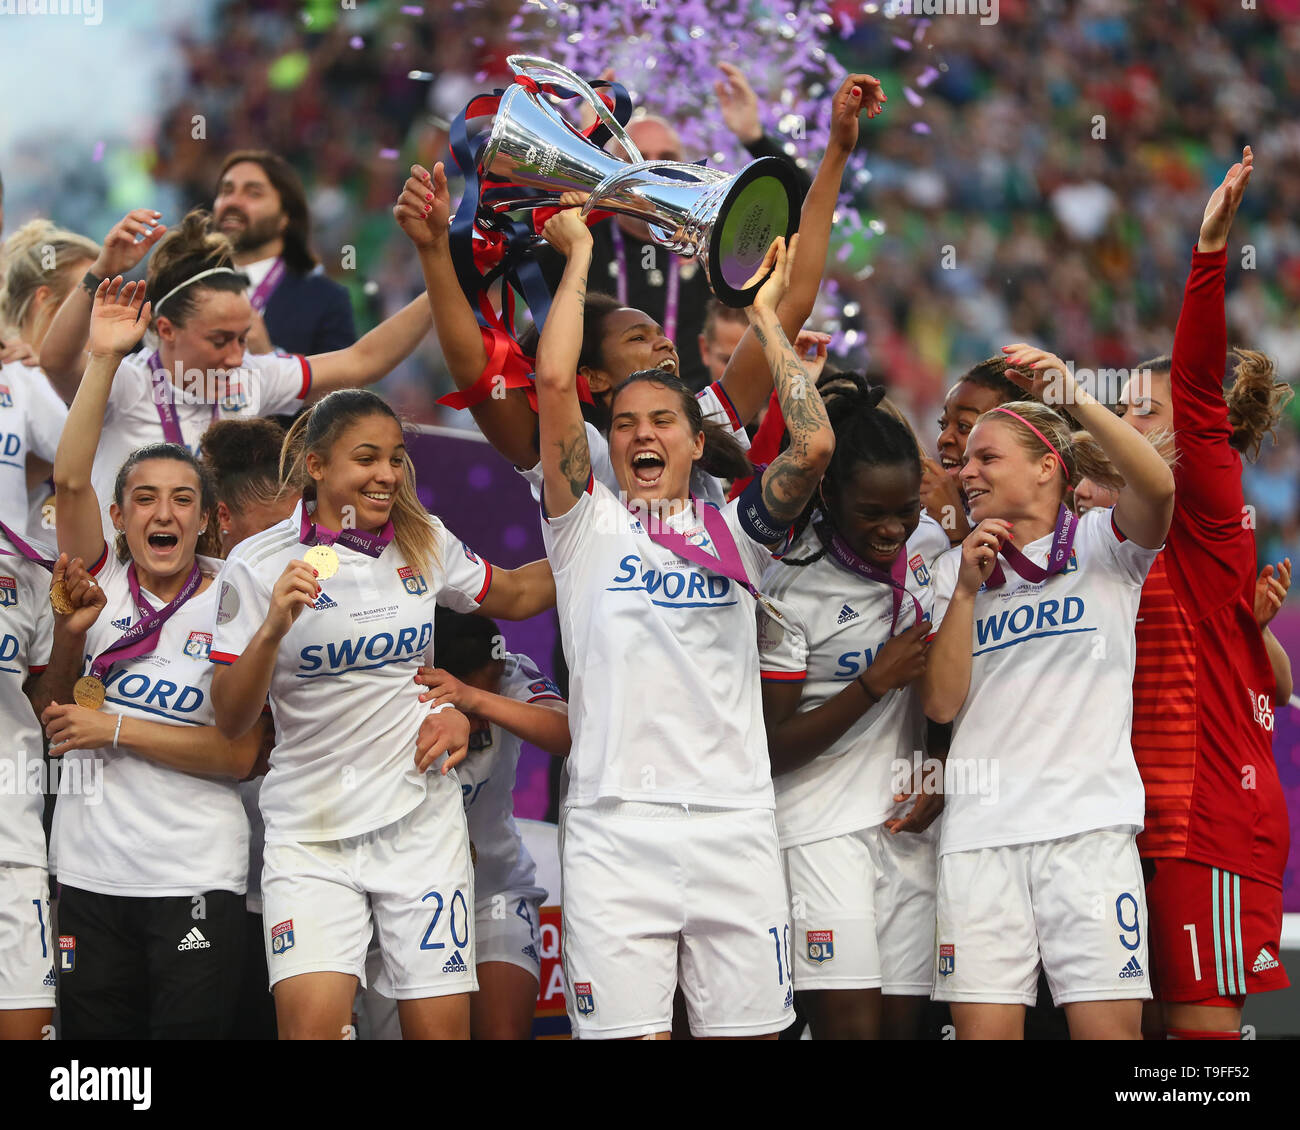 Budapest, Hungary. 18th May, 2019. Olympique Lyonnais players celebrate  with Trophy during the UEFA Women's Champions League Final between  Olympique Lyonnais and FC Barcelona Women at Groupama Arena on May 18, 2019